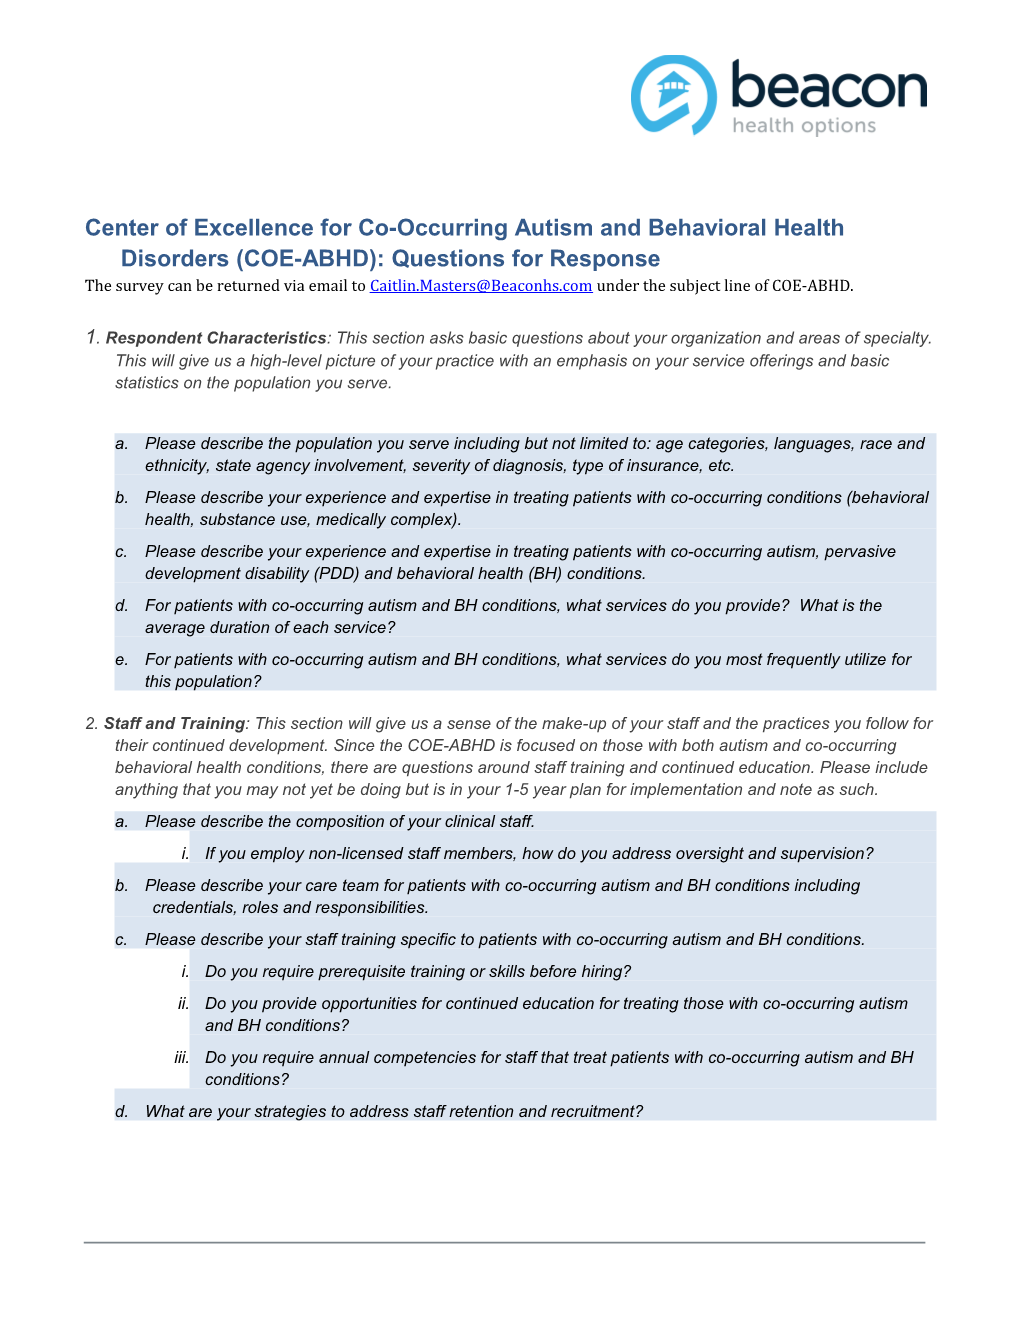 Center of Excellence for Co-Occurring Autism and Behavioral Health Disorders (COE-ABHD)